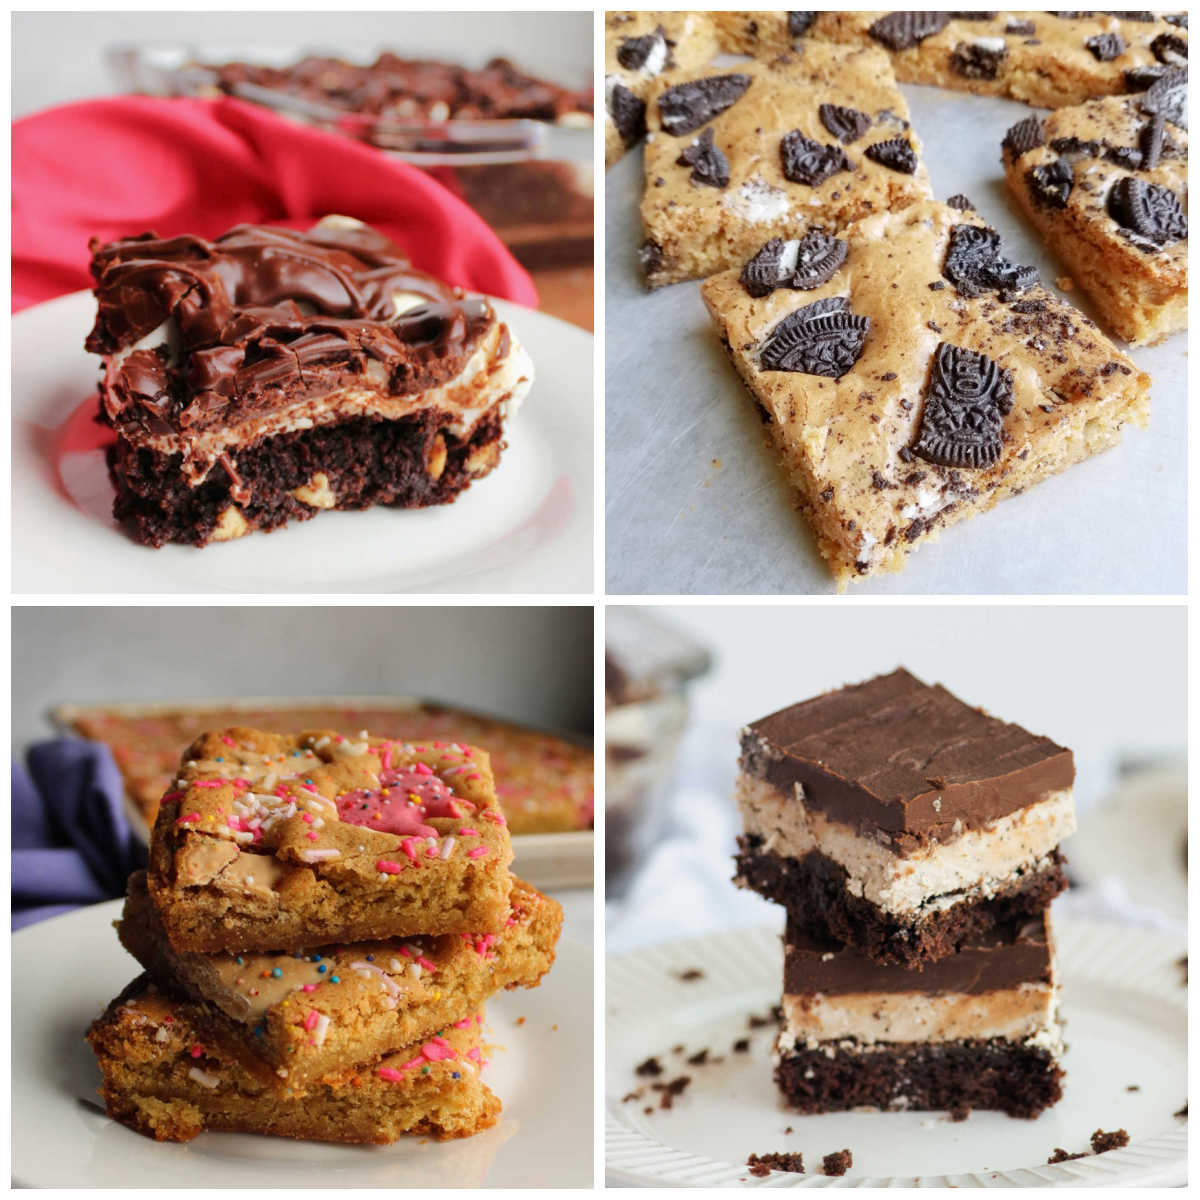 Collage of dessert images including mississippi mud brownies, oreo blondies, coffee and cream blondies and animal cracker blondies.